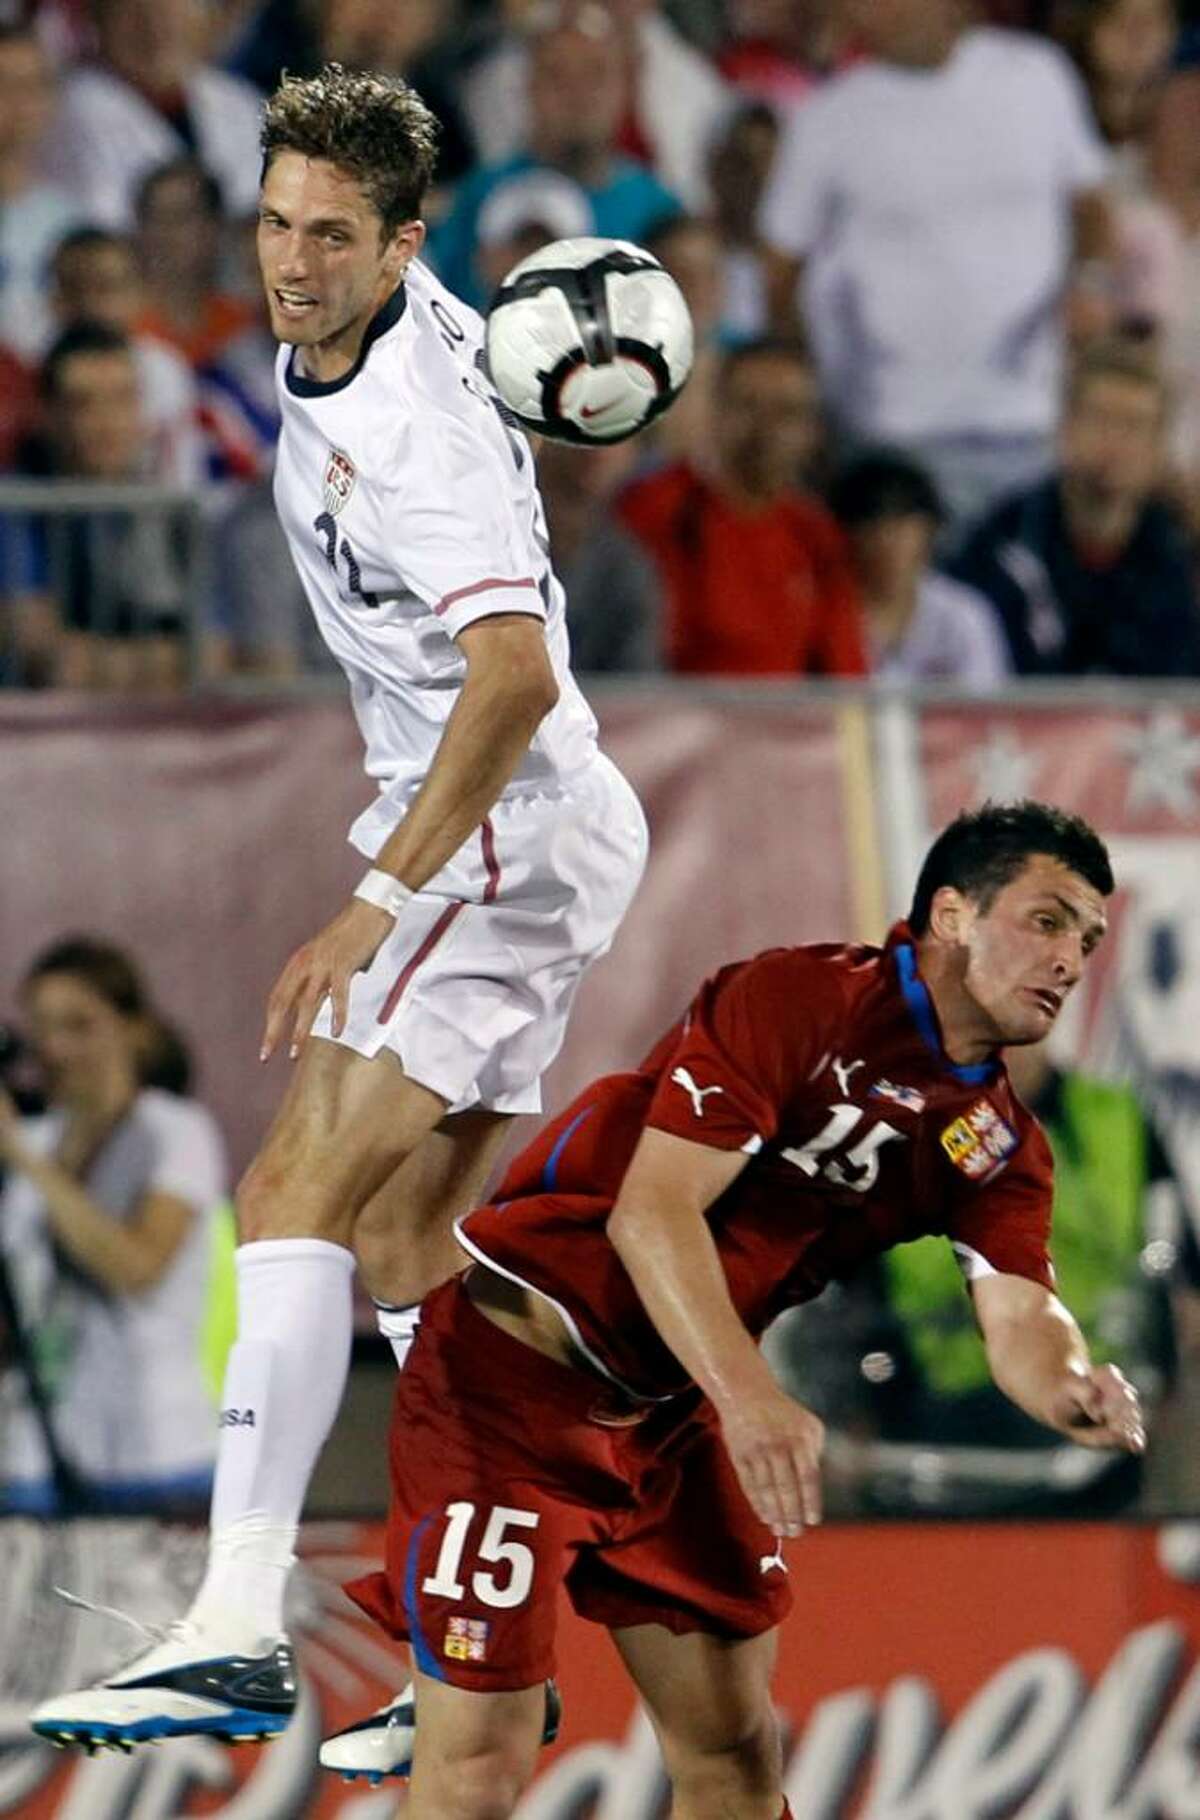 United States' Clarence Goodsen, left, heads the ball against Czech Republic's Martin Fenin (15) during the first half of an international friendly soccer match in East Hartford, Conn., Tuesday, May 25, 2010. The Czech Republic won 4-2.